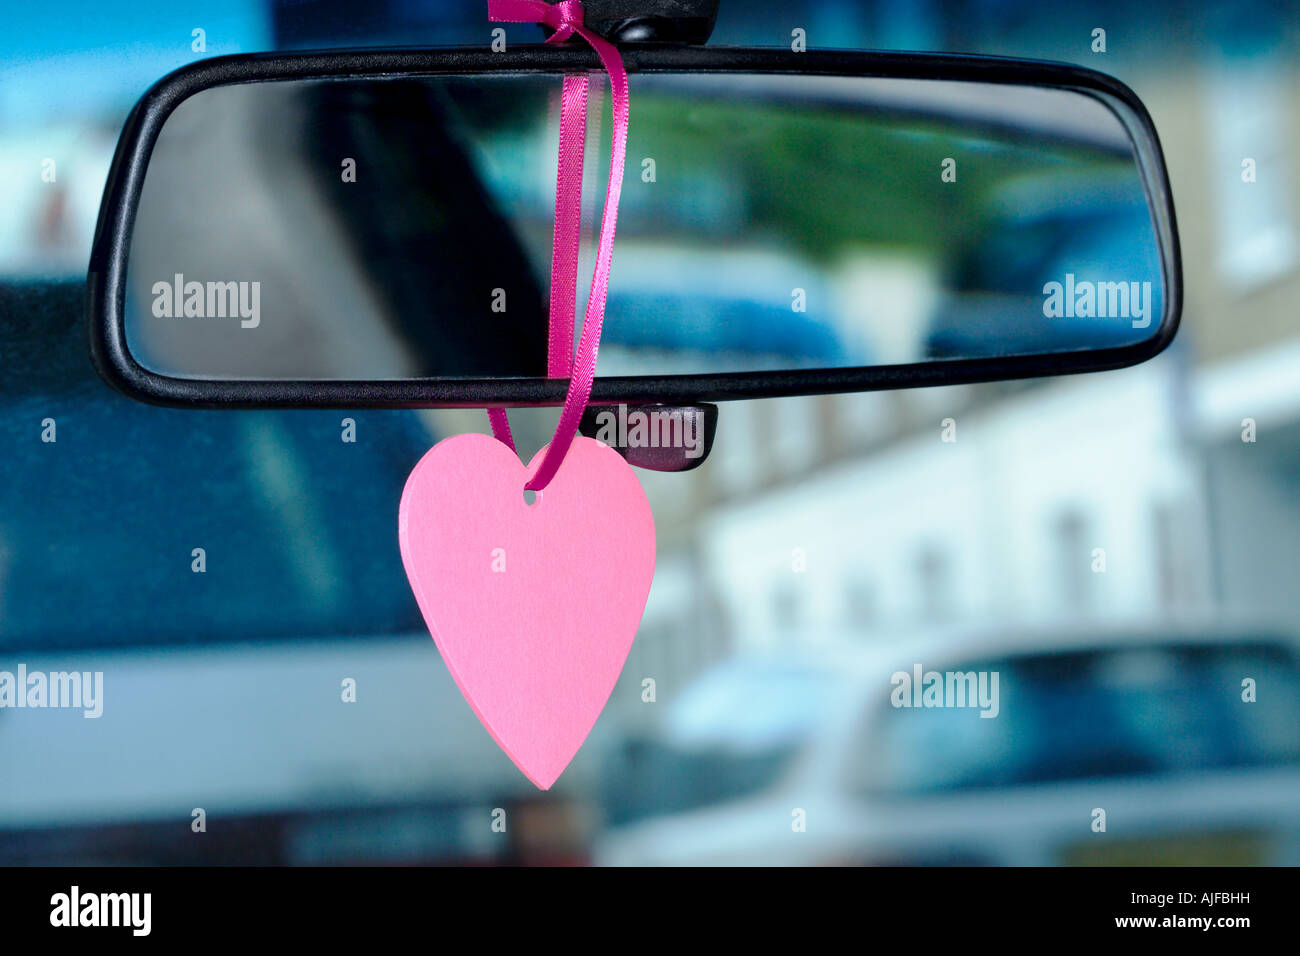 A trinket hanging on a rearview mirror Stock Photo